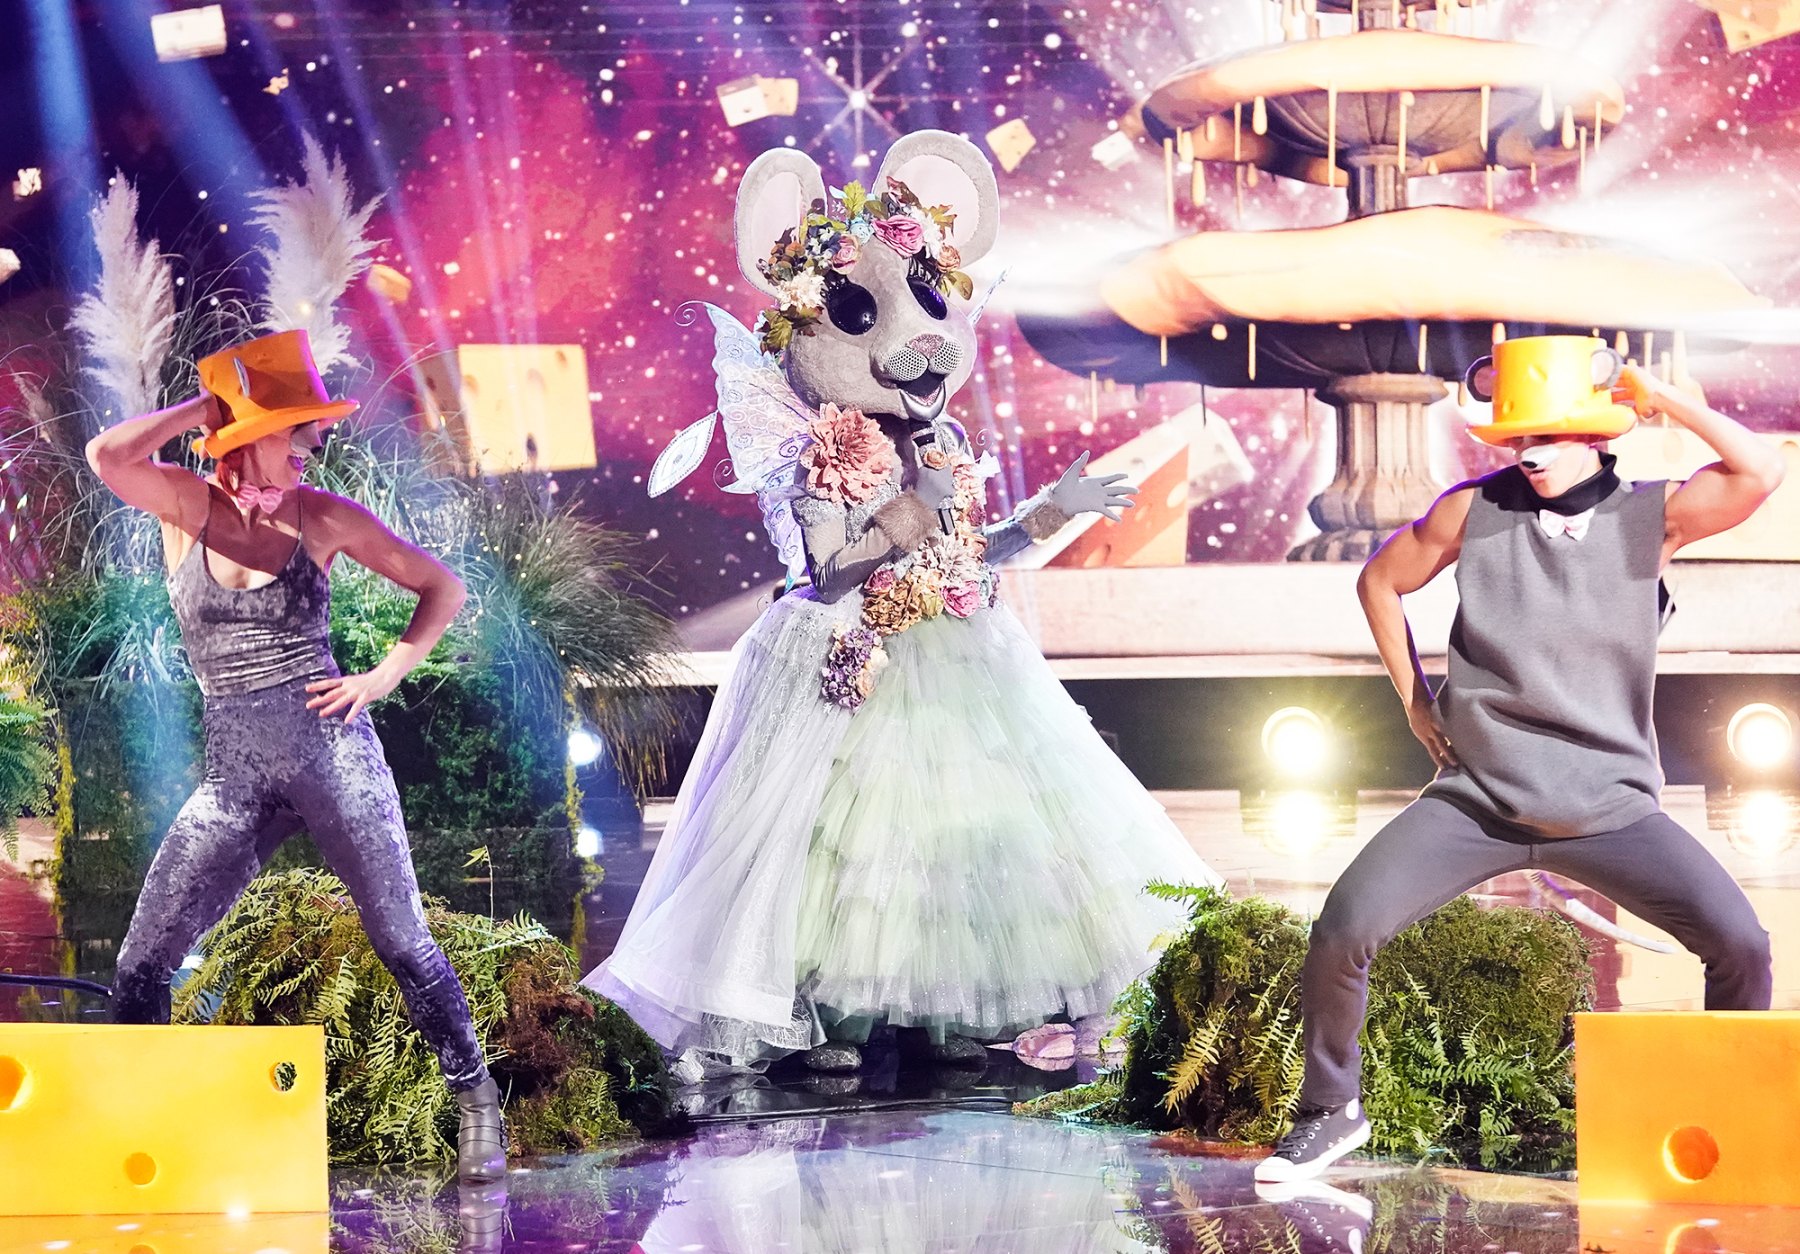 'The Masked Singer' Judges Finally Get It Right Who Is the Mouse?